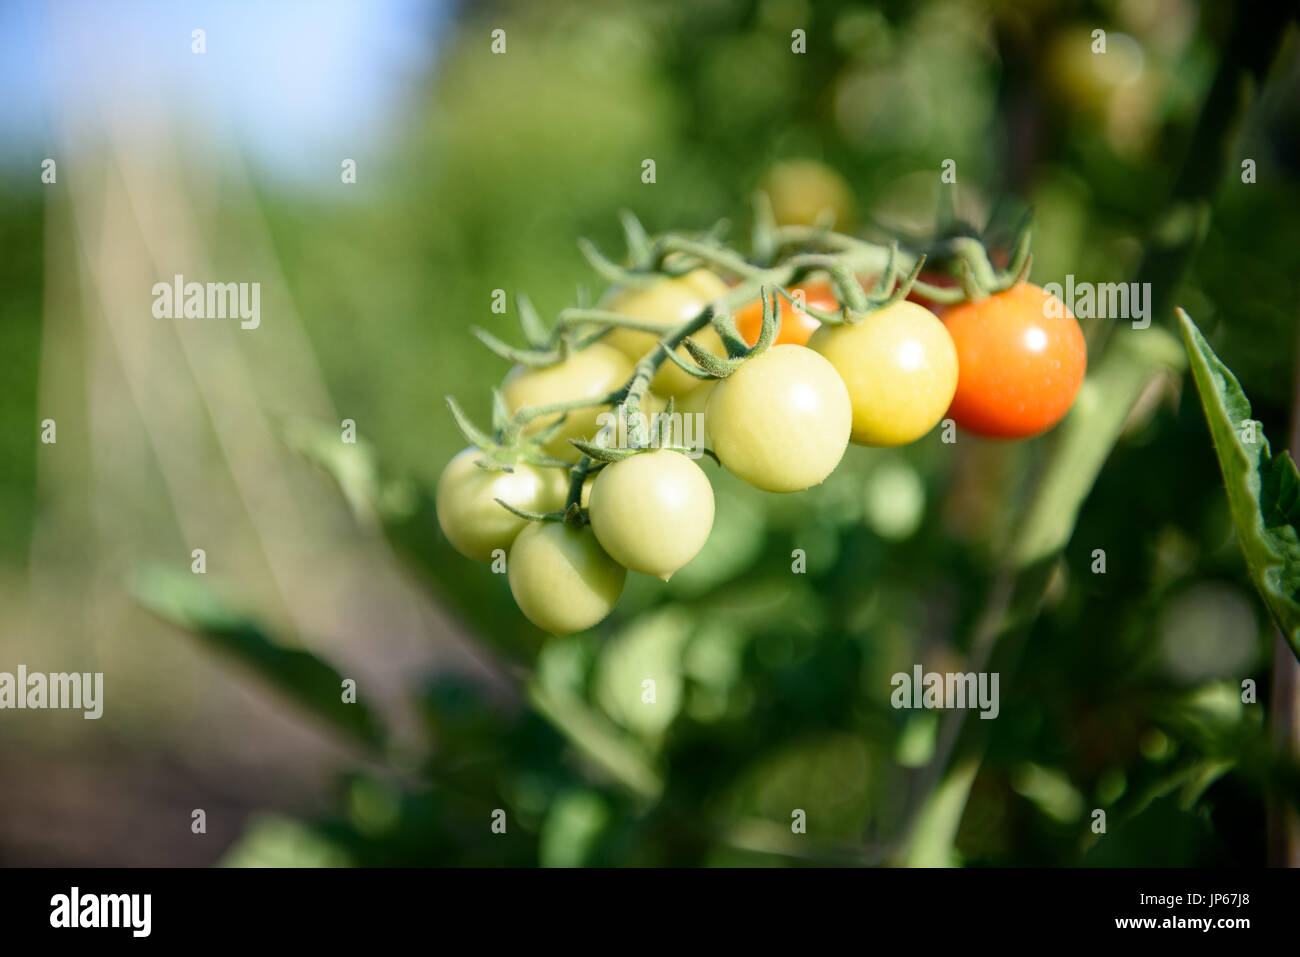 Extreme close up and selective focused bunch of cherry tomato fruits on branch plant in vegetable garden Stock Photo